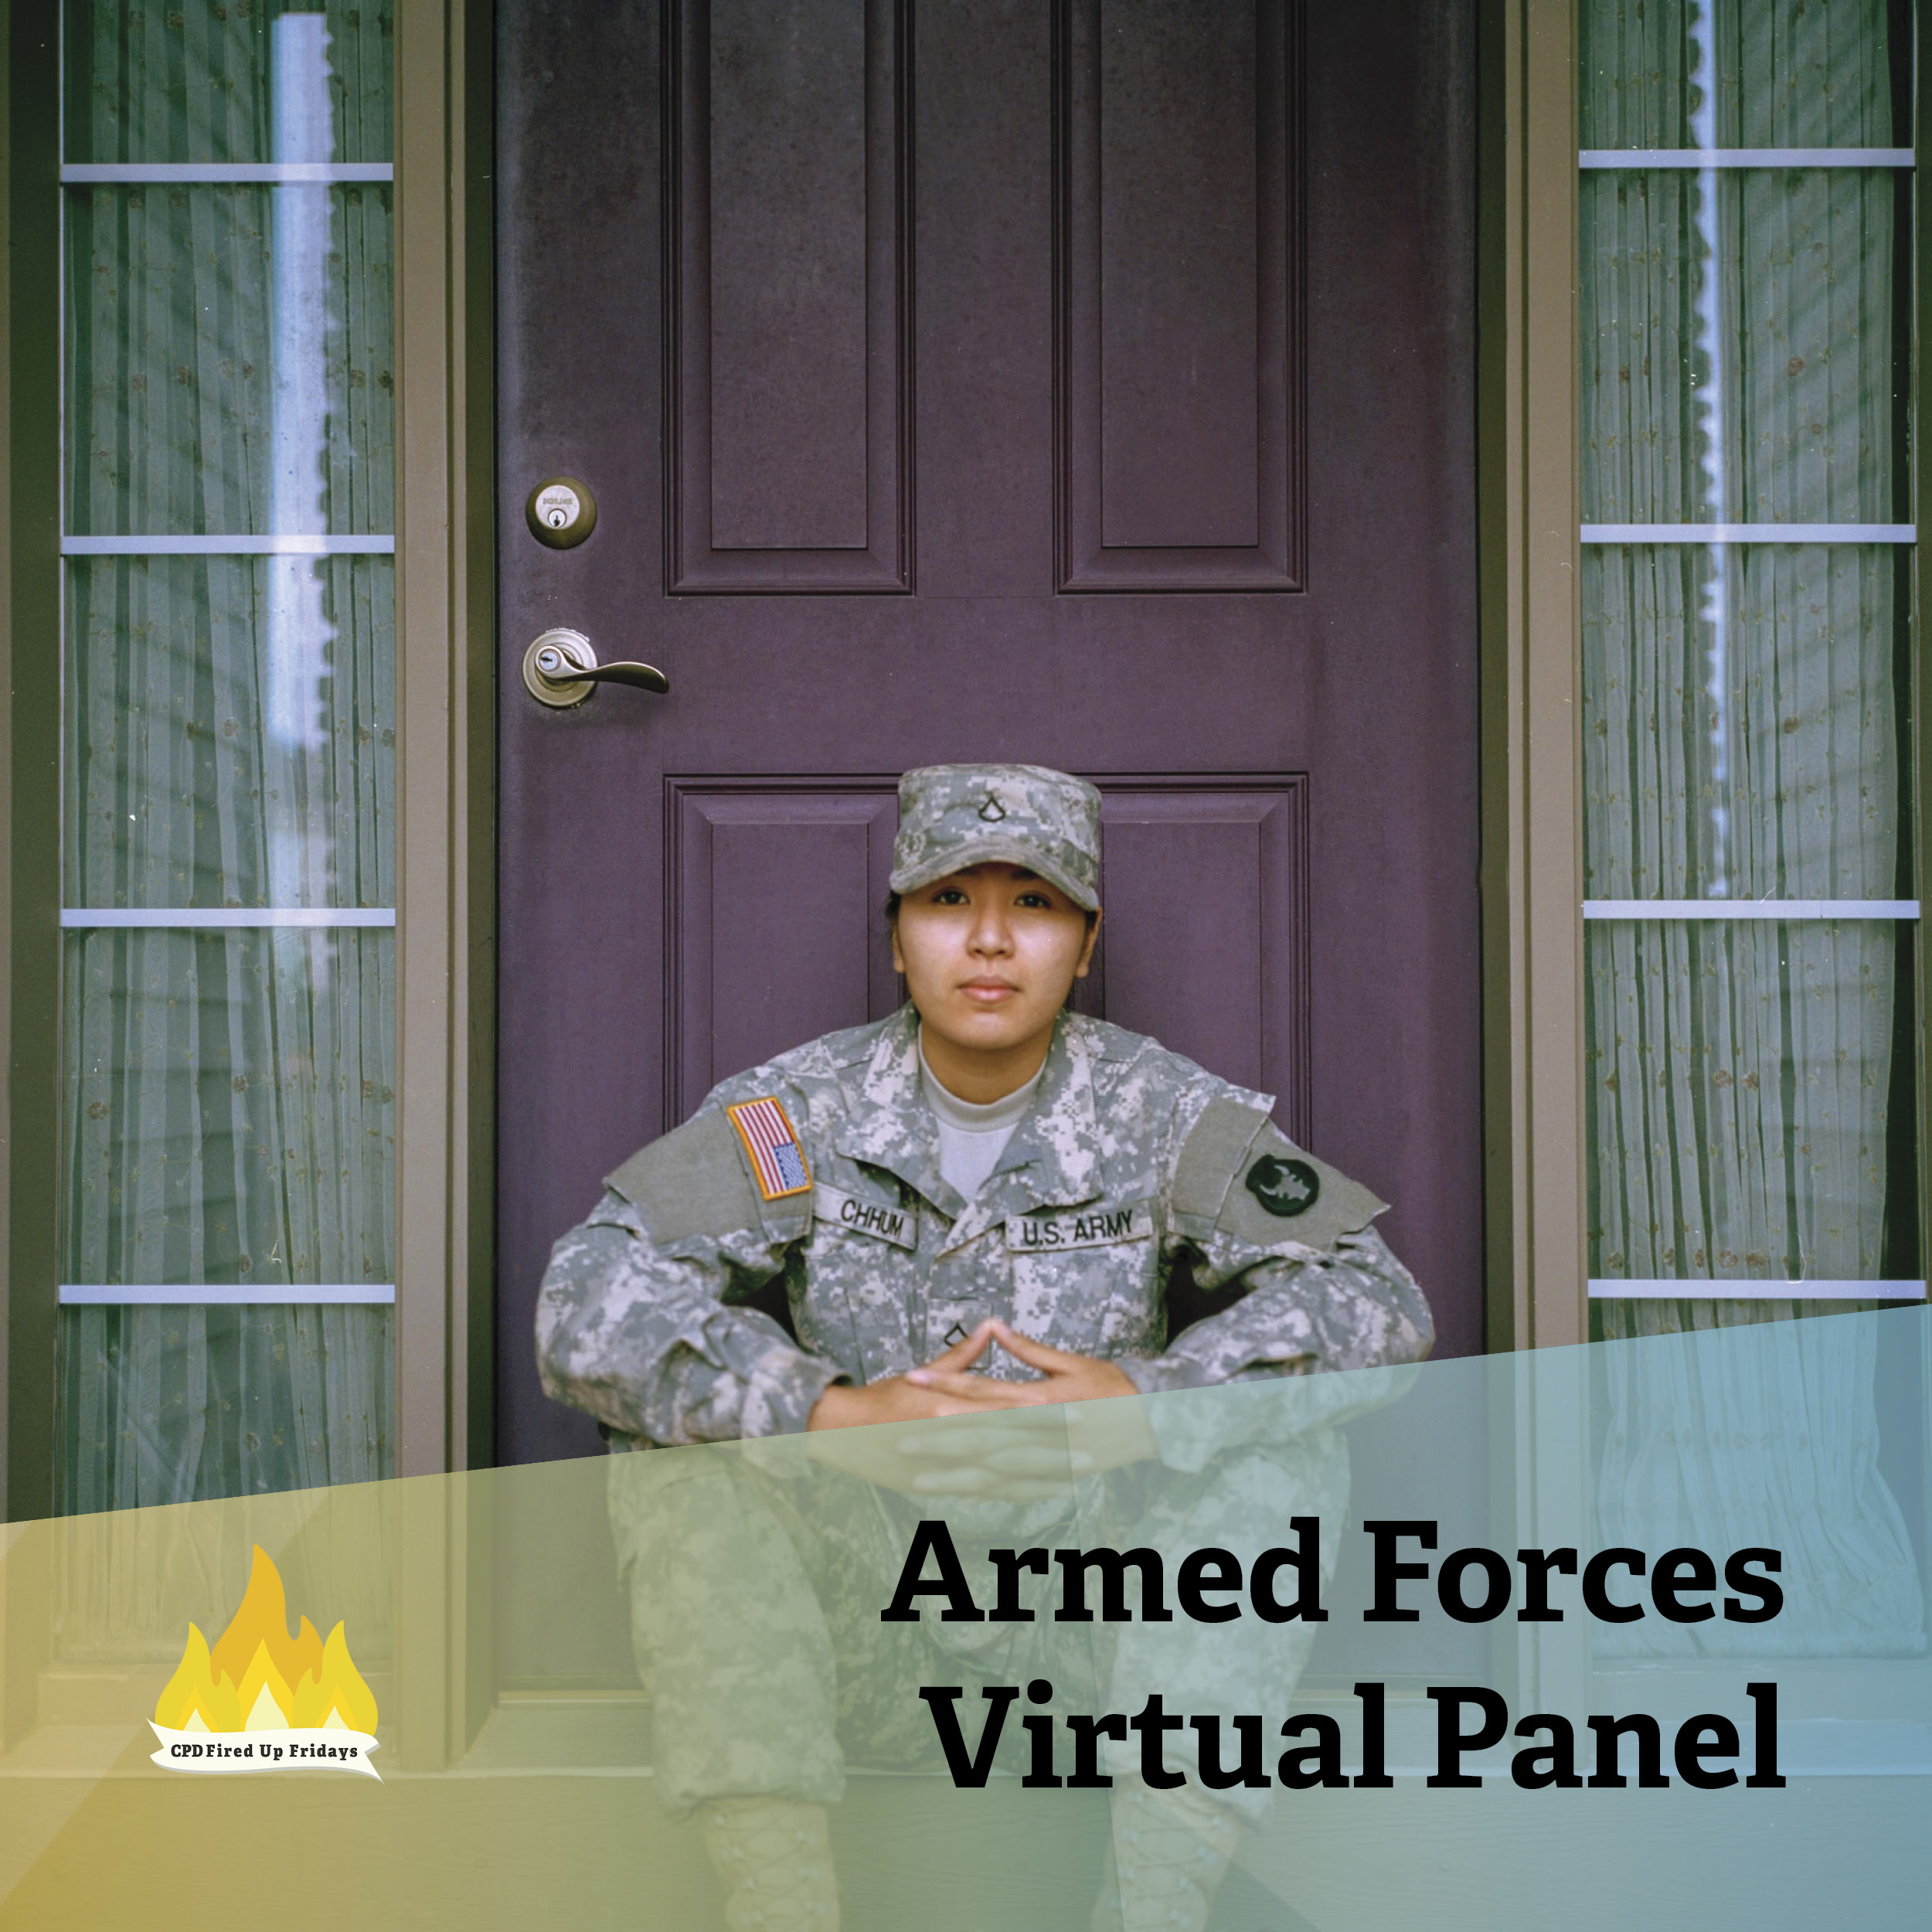 A young woman in military fatigues sits on the steps in front of her house. She looks intently at the camera with a calm expression. Beneath her, the text reads: 'Armed Forces Virtual Panel.'